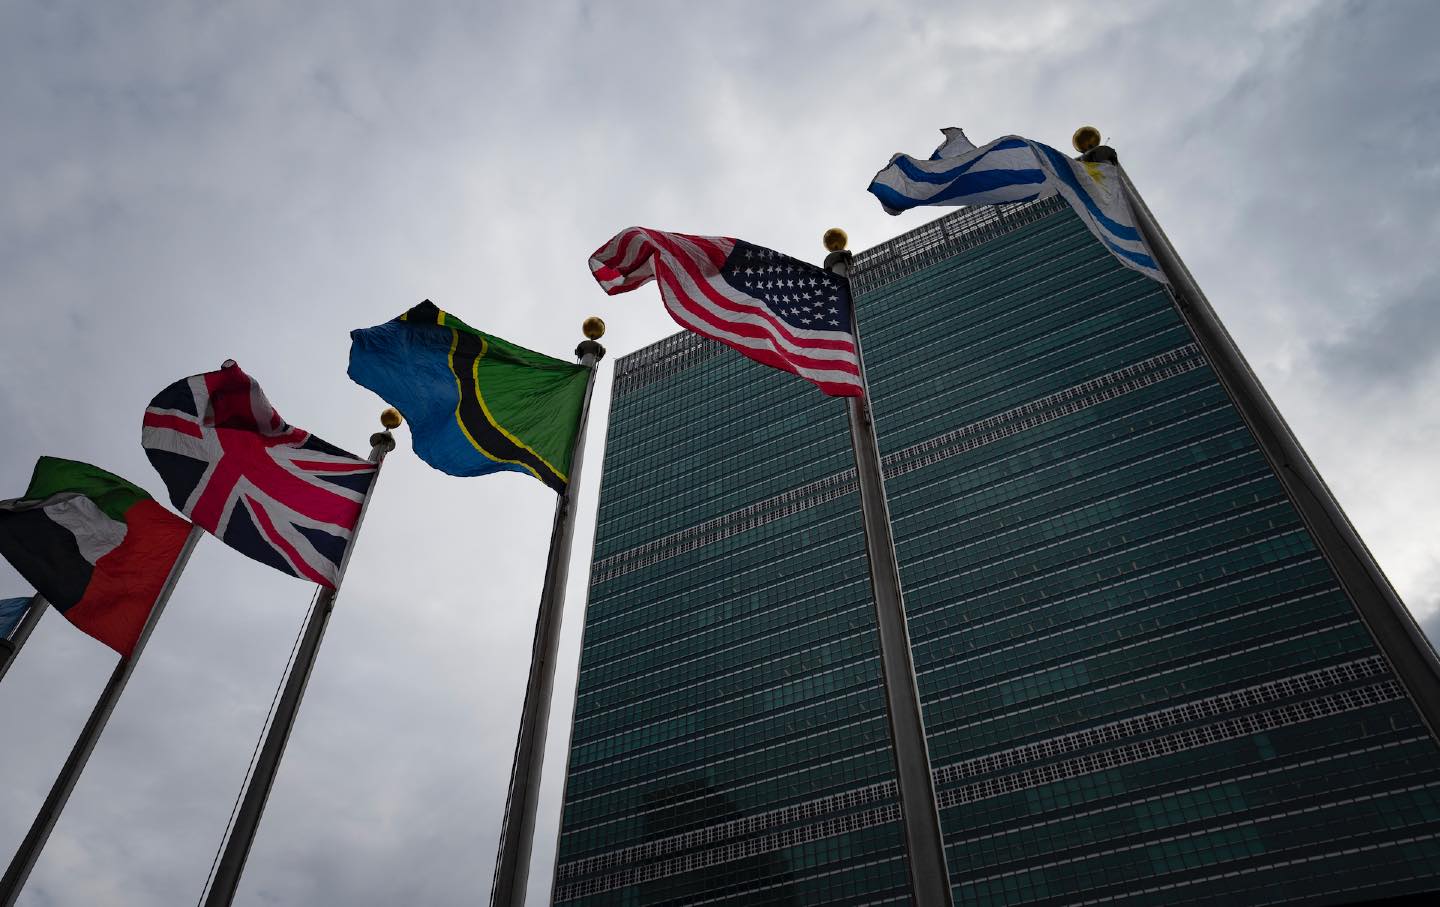 Row of flags, including US flag, outside United Nations building